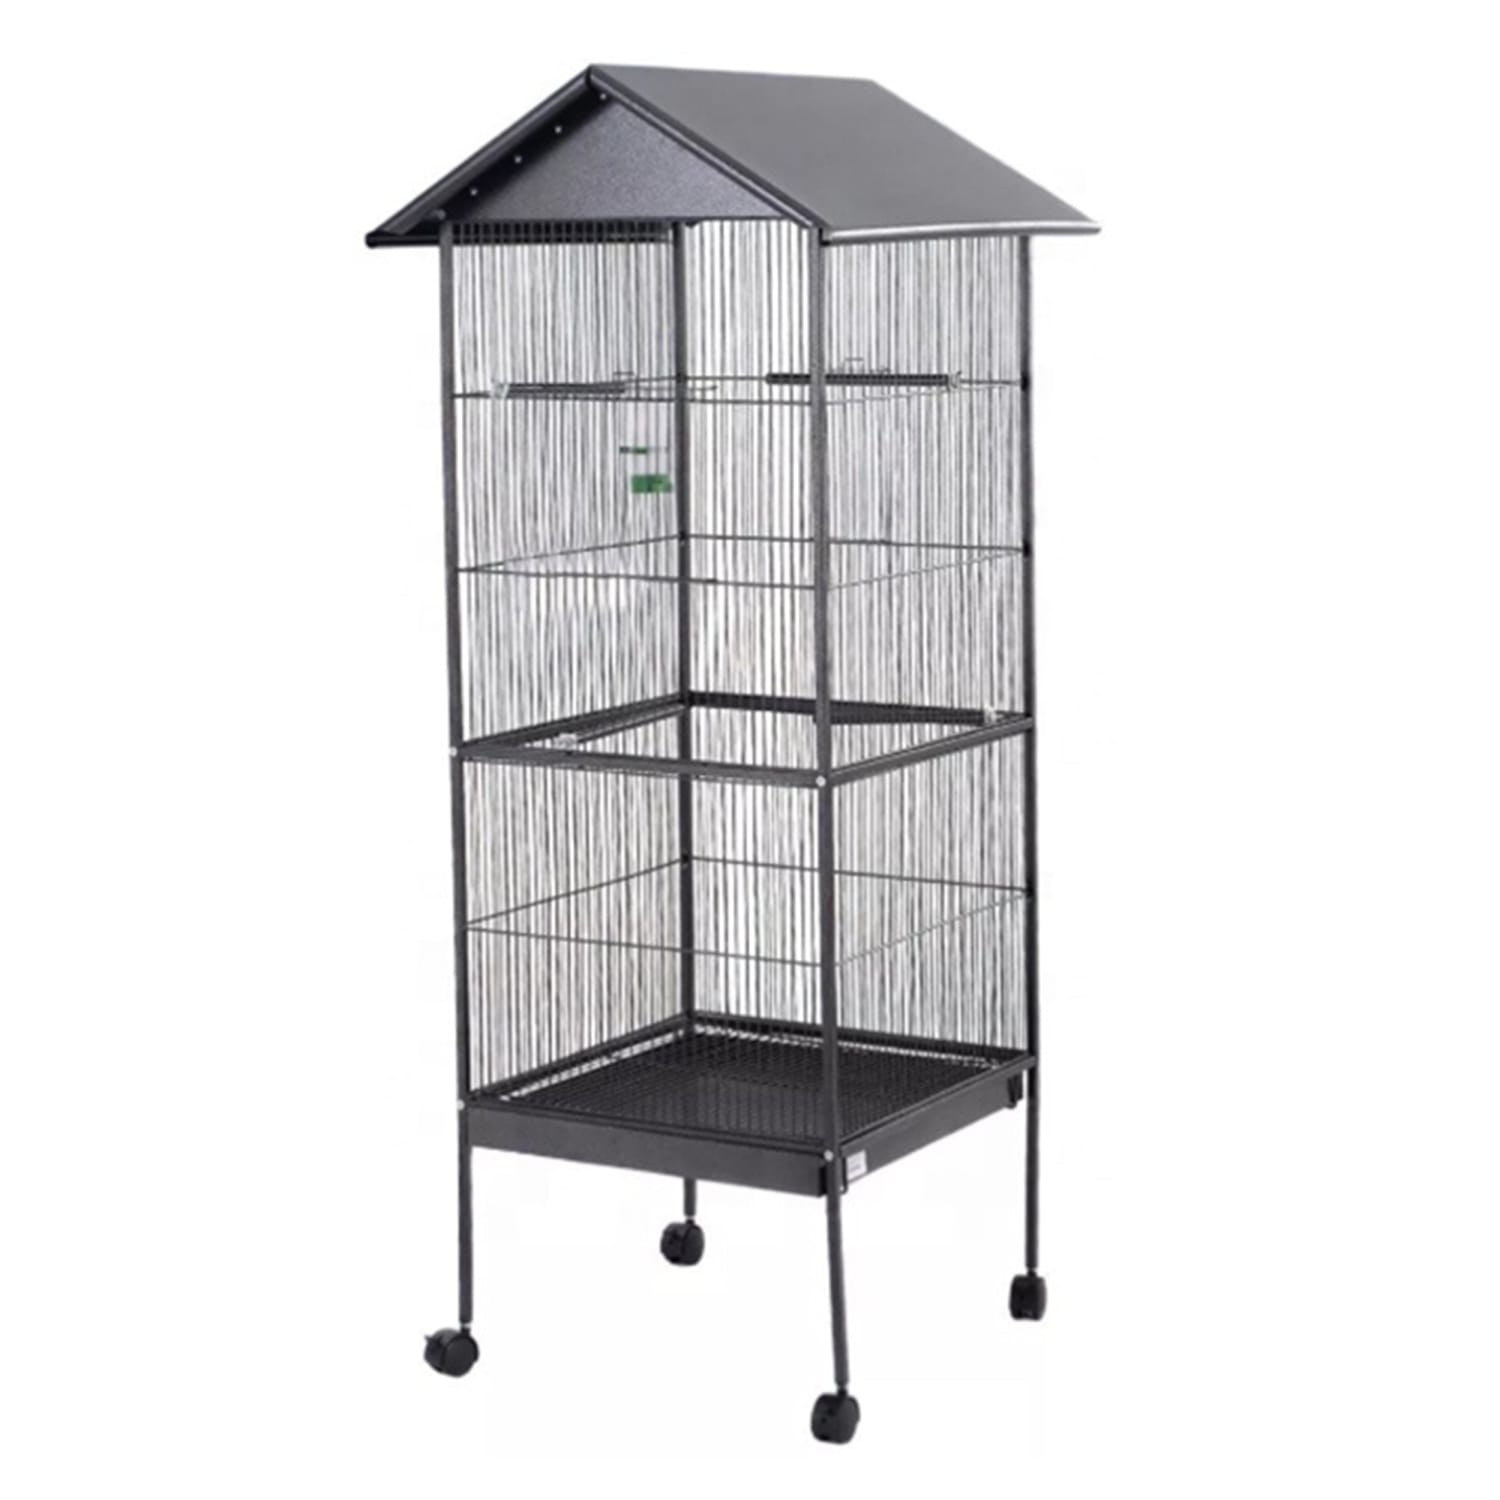 Large Bird Cages for Parrots: How to Choose the Best Bird Cage